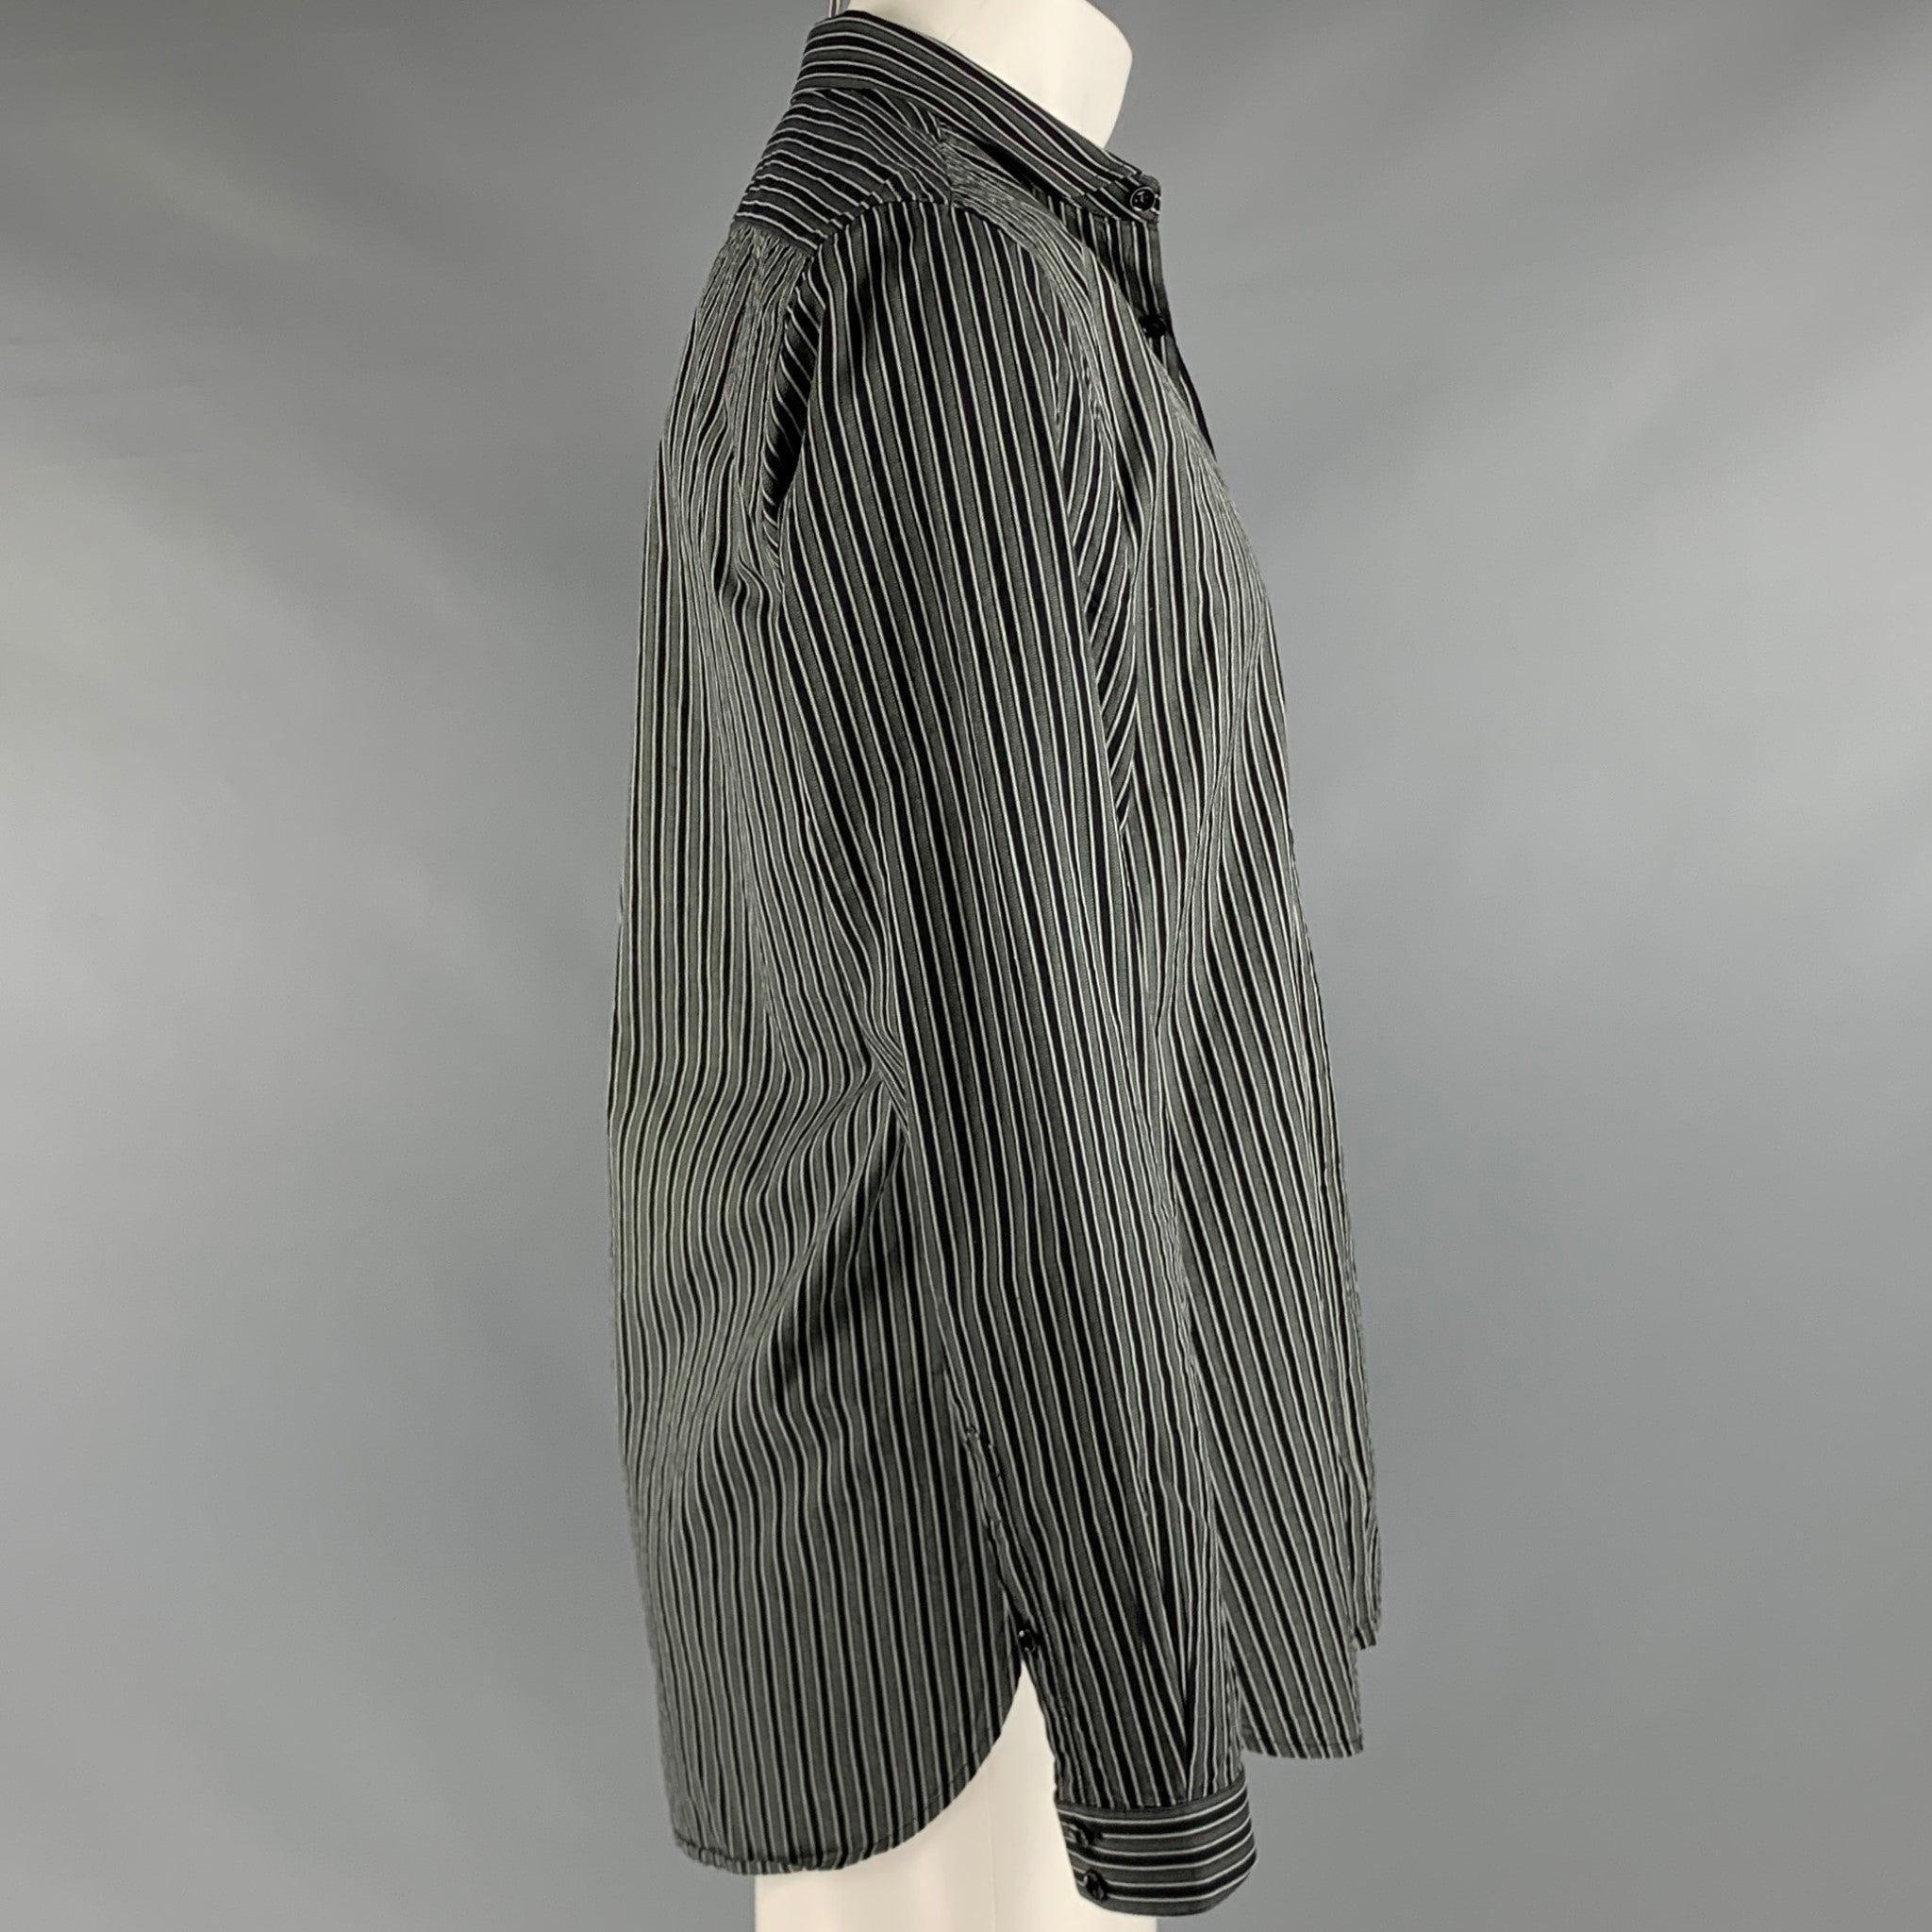 SAINT LAURENT long sleeve shirt
in black and grey cotton fabric featuring vertical stripe pattern, cutaway collar, and button closure. Made in Italy. Very Good Pre-Owned Condition. Minor pilling. 

Marked:   40/15.75  

Measurements: 
  
Shoulder: